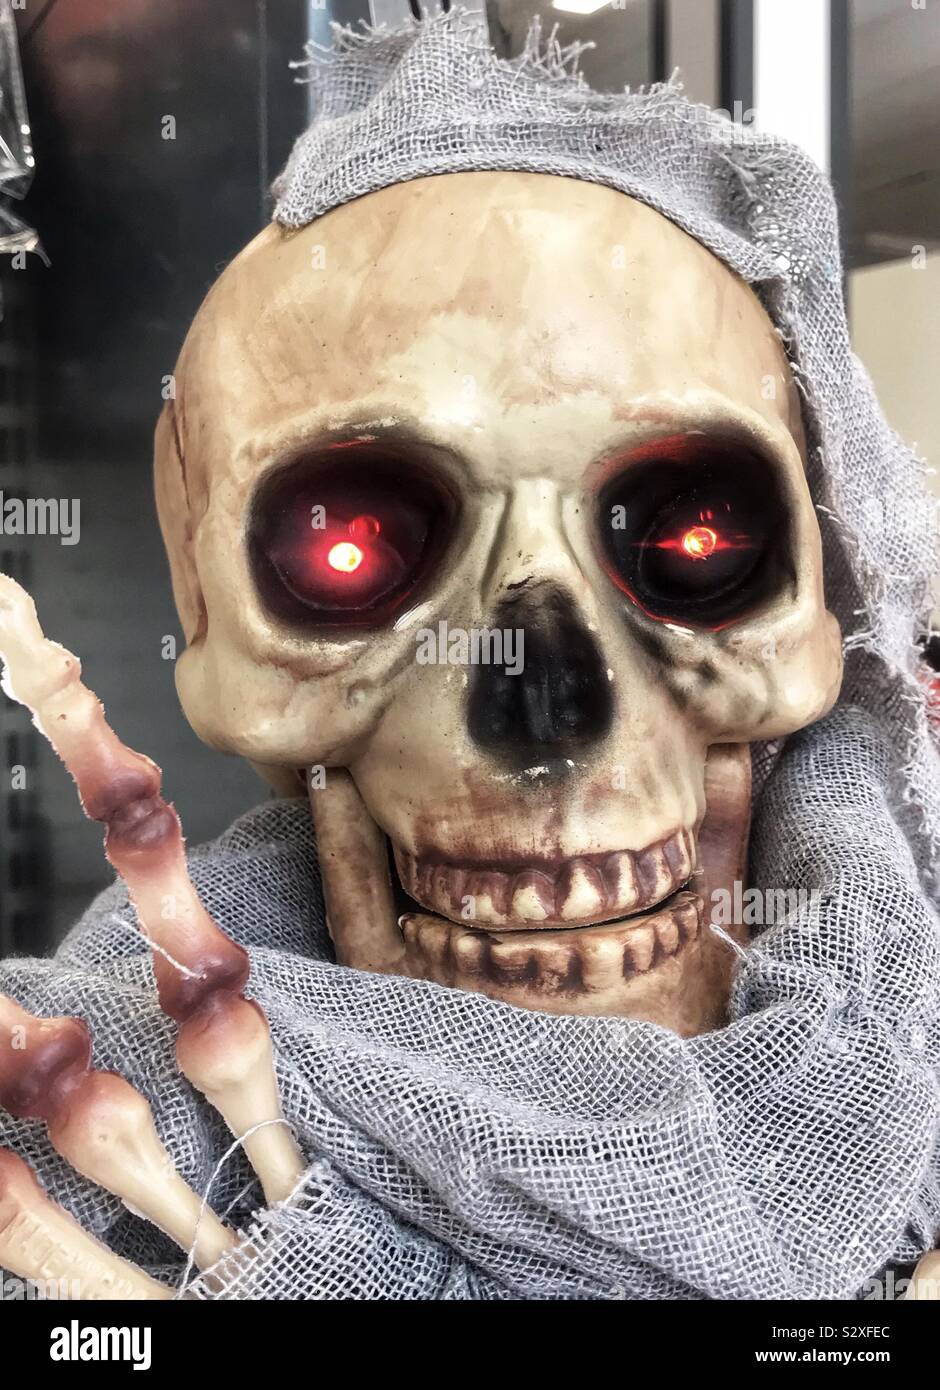 Skull with glowing, red eyes Stock Photo